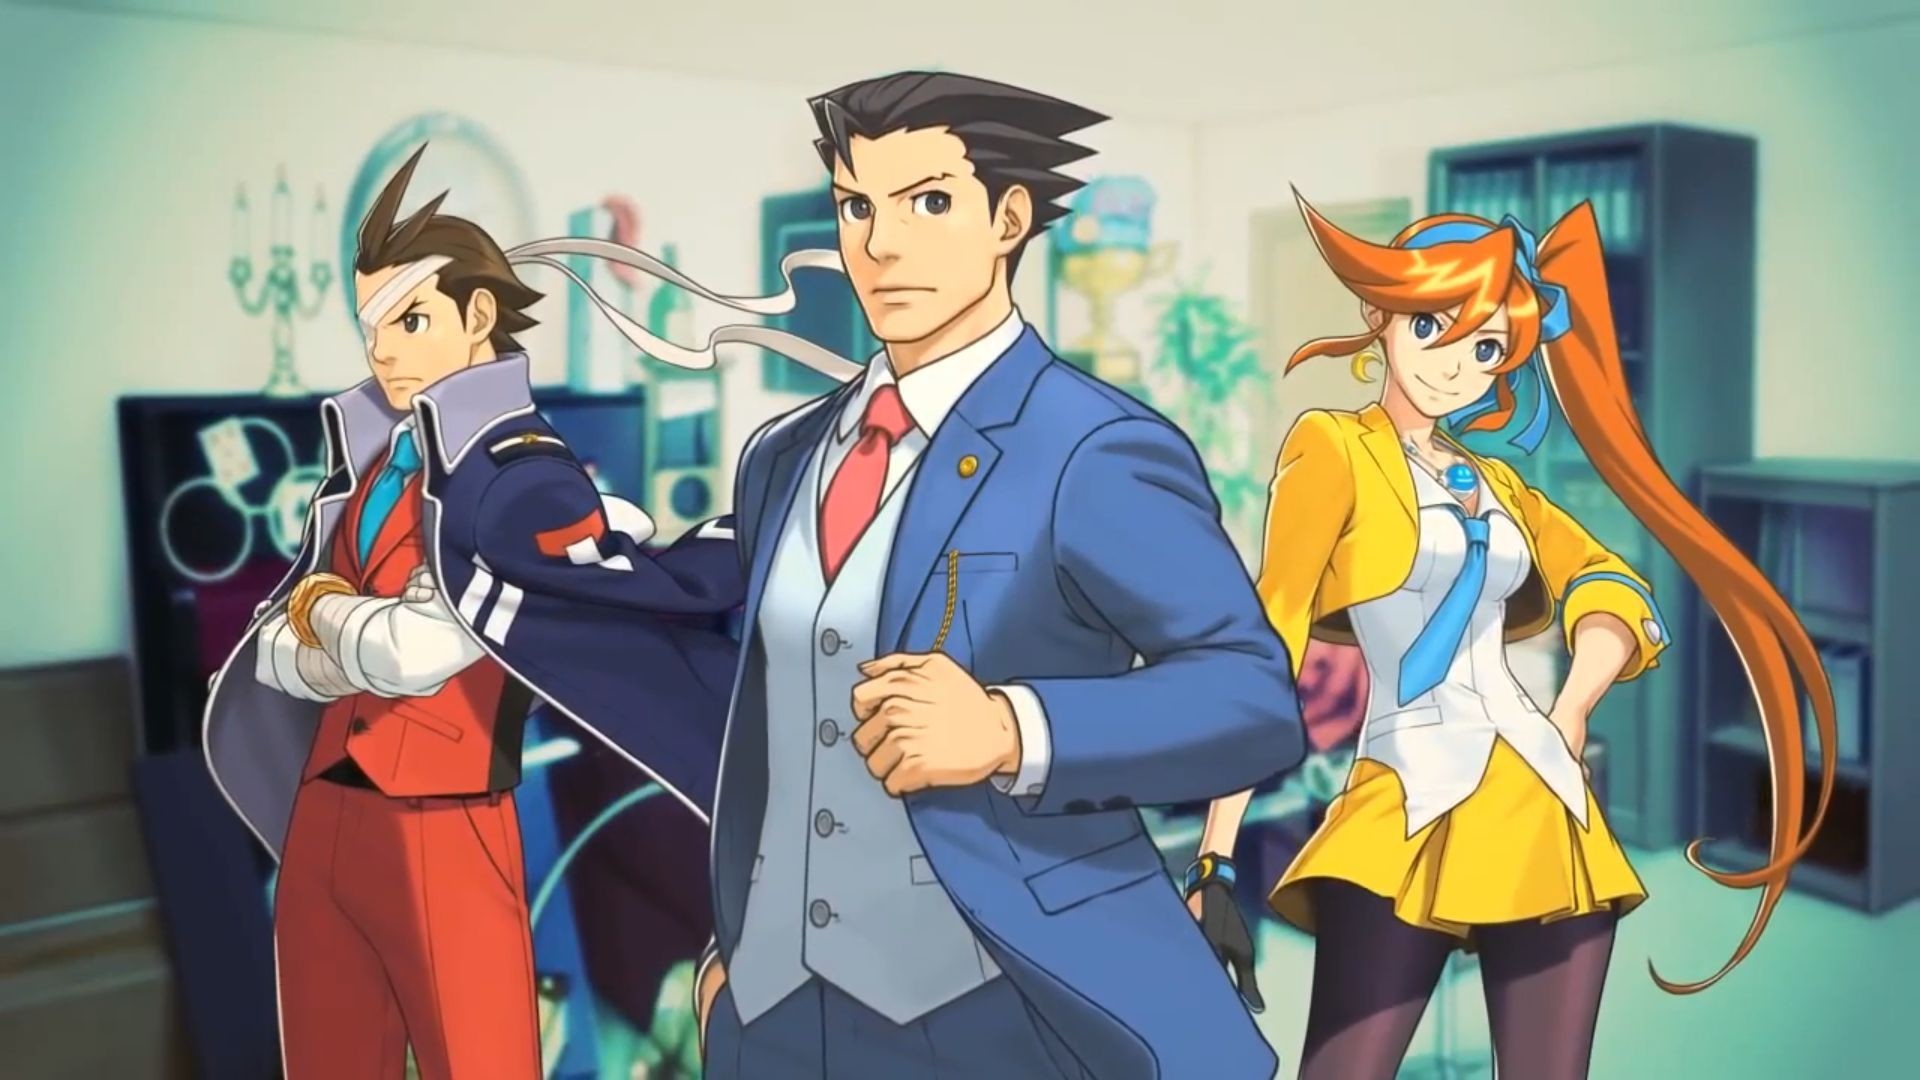 1920x1080 Ace Attorney Wallpapers - Wallpaper Cave